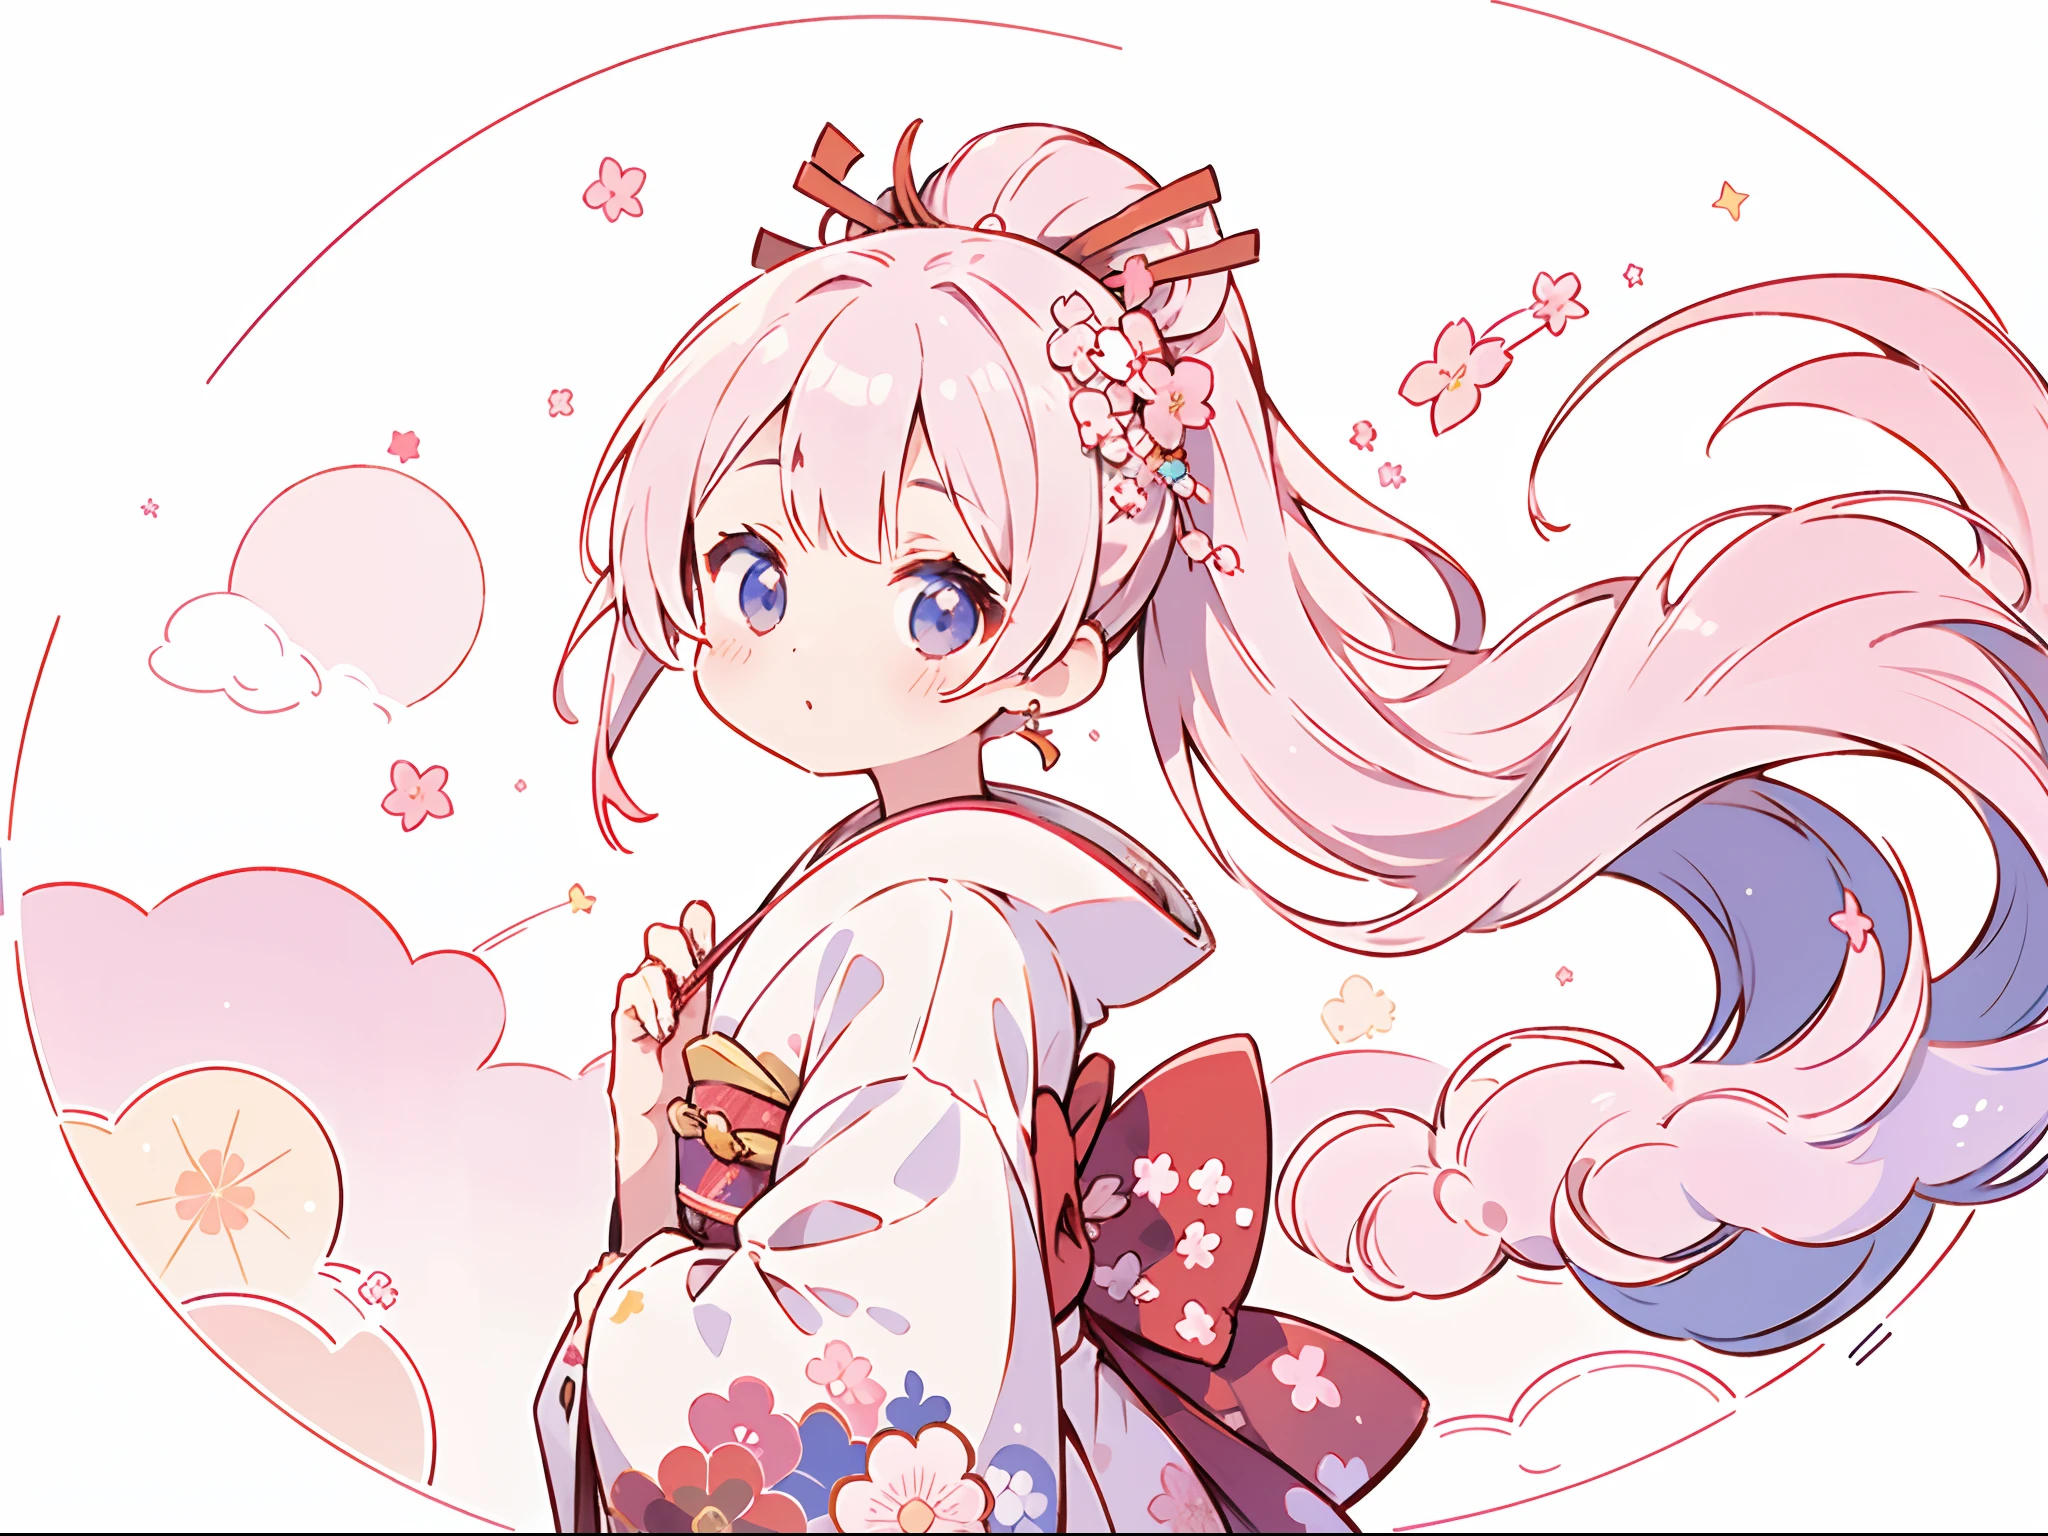 1 sticker, sticker, nikkaze, (cute girl), (gorgeous kimono), (gorgeous hair accessory), (Japanese traditional hairstyle), cherry blossoms, clouds, behind is a huge round moon, stars, white background, no background, simple background, minimal, cute, tiny, pastel color, vector style, no gradient